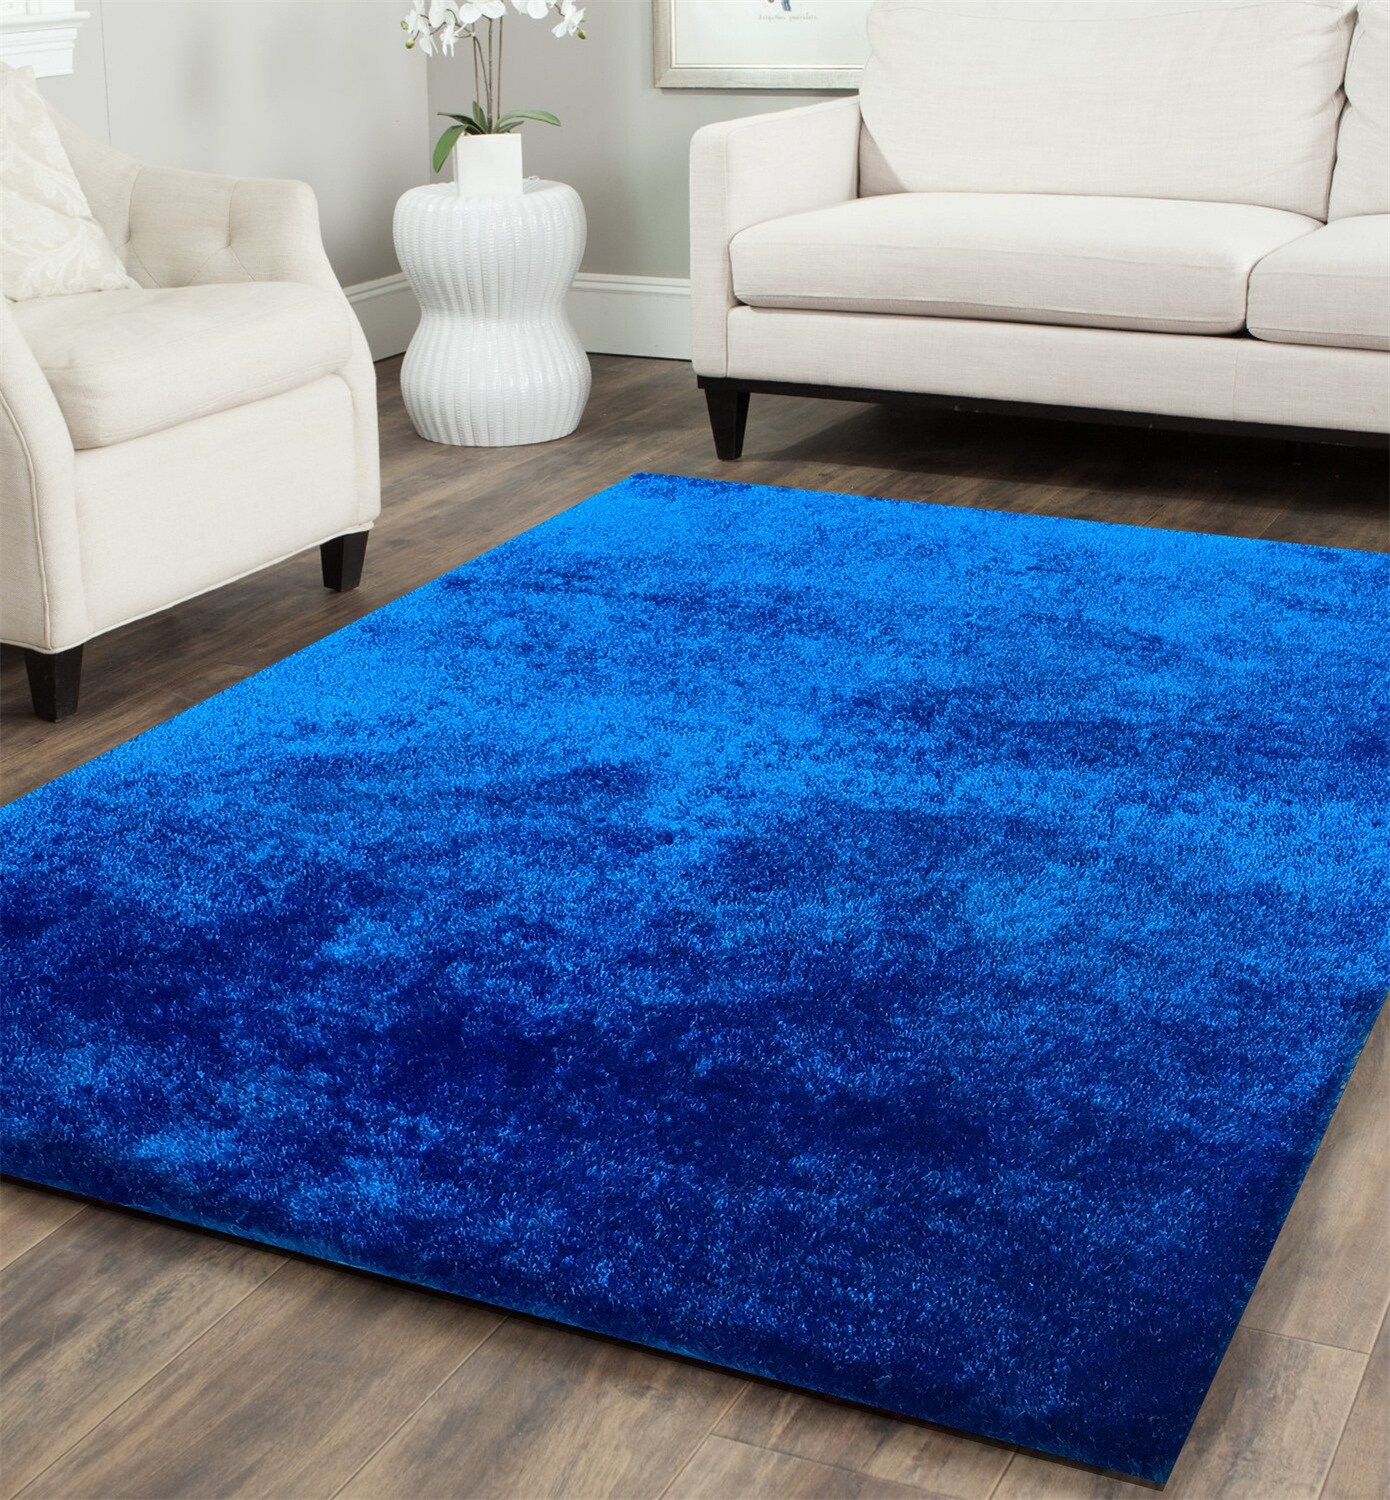 Amazing Rugs Fuzzy Shaggy 8 x 11 Electro Blue Indoor Solid Area Rug in ...